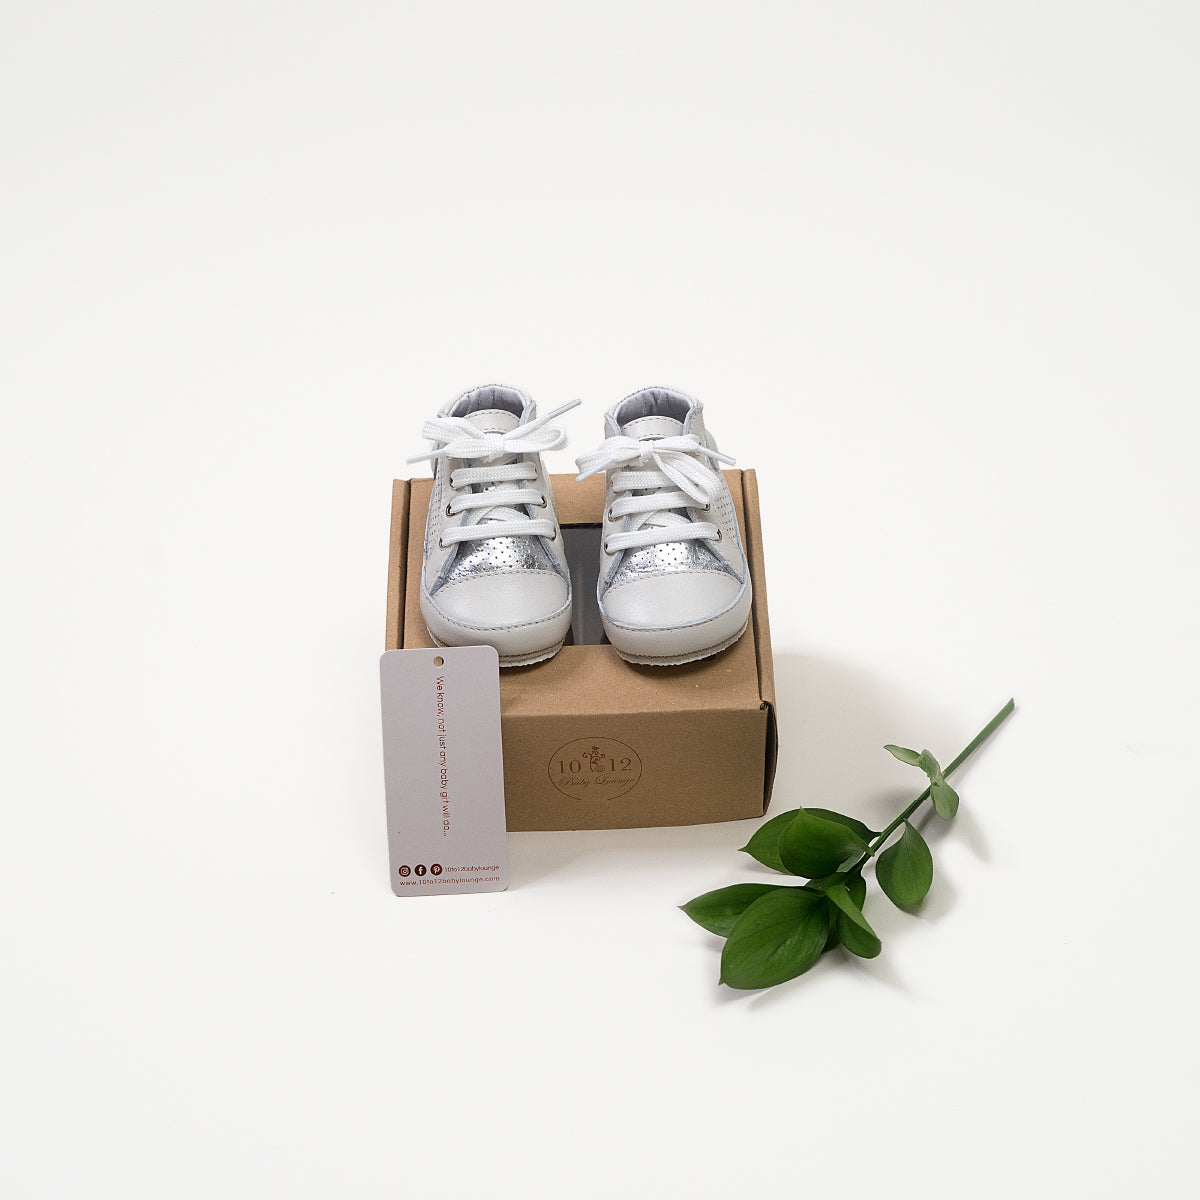 Baby Baller Sneakers - Silver - Product Shot with the Box